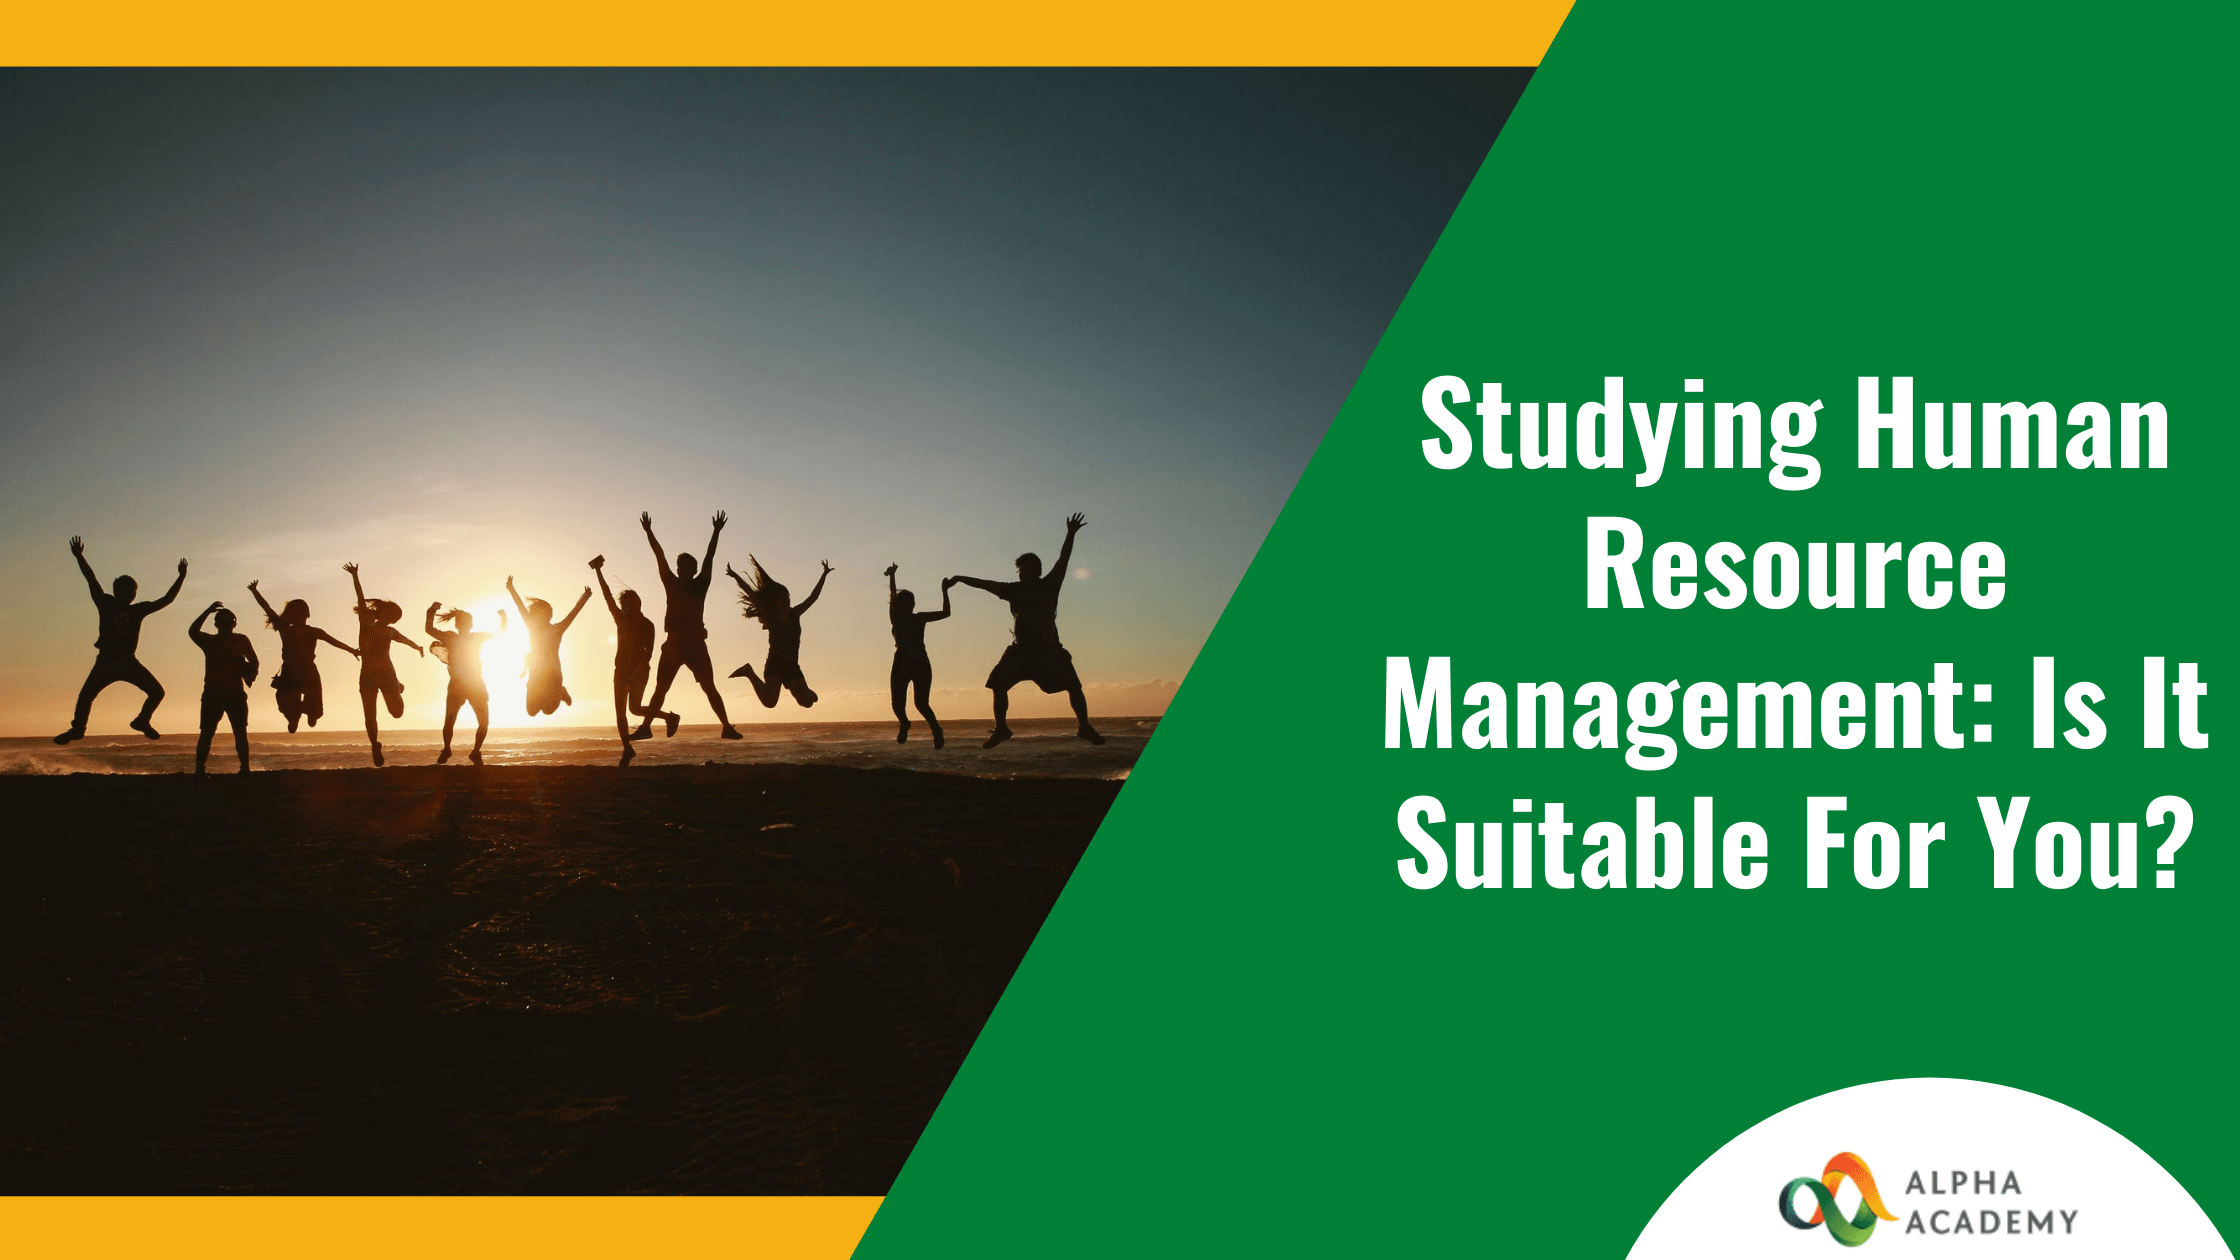 Studying Human Resource Management: Is It Suitable For You?